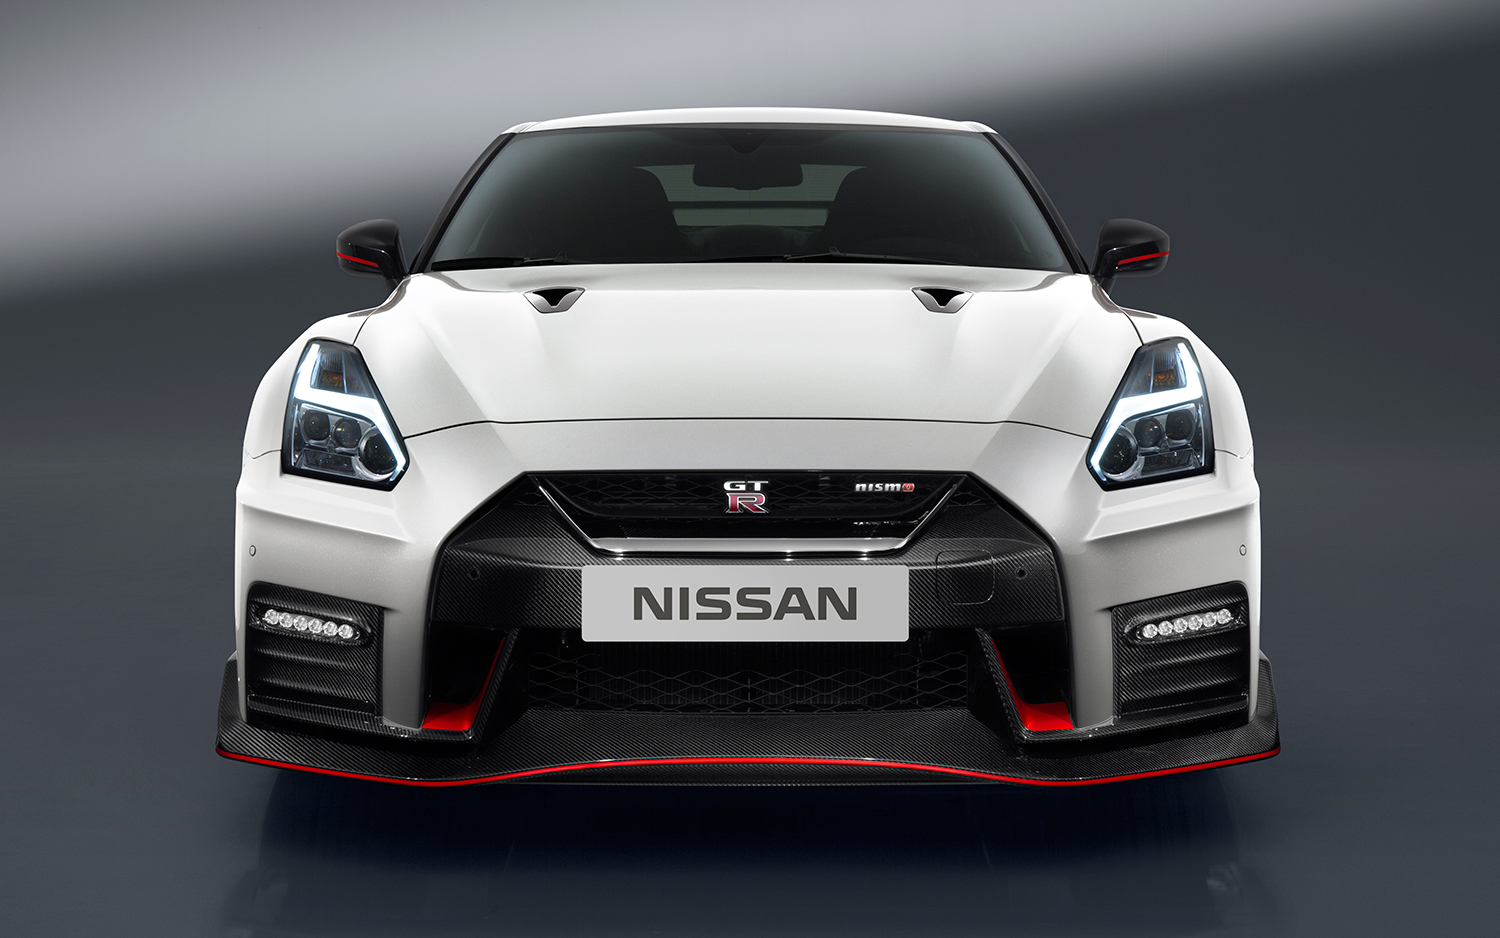 HQ Nissan GT-R Wallpapers | File 620.52Kb